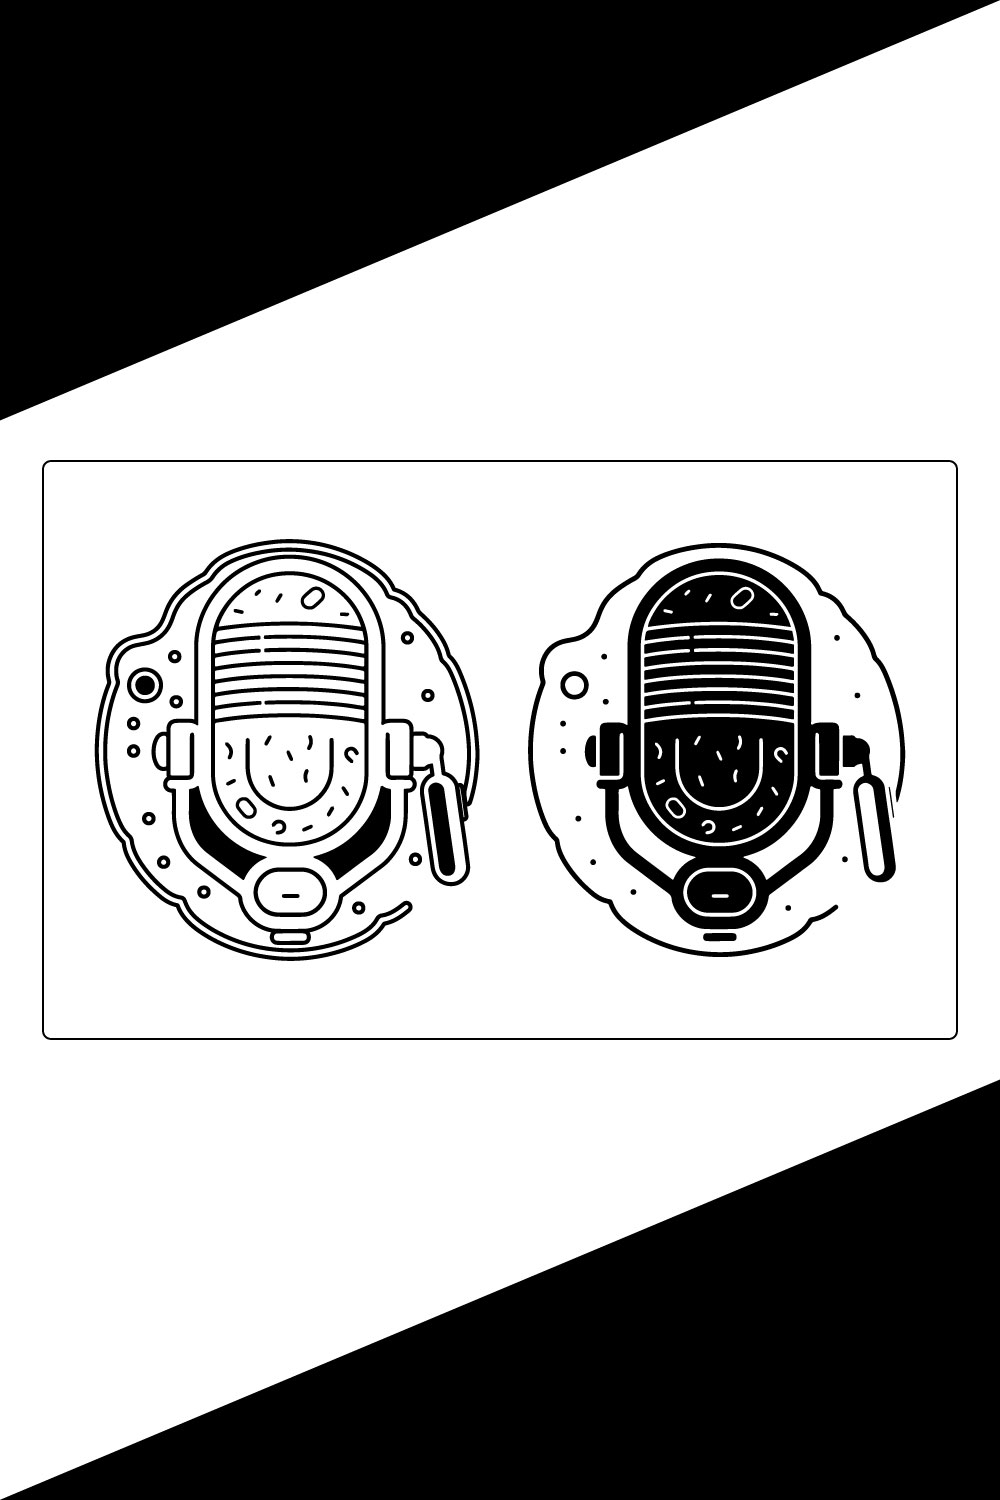 Podcast and Audio line icon set vector,Microphone vector icon, Web design icon pinterest preview image.